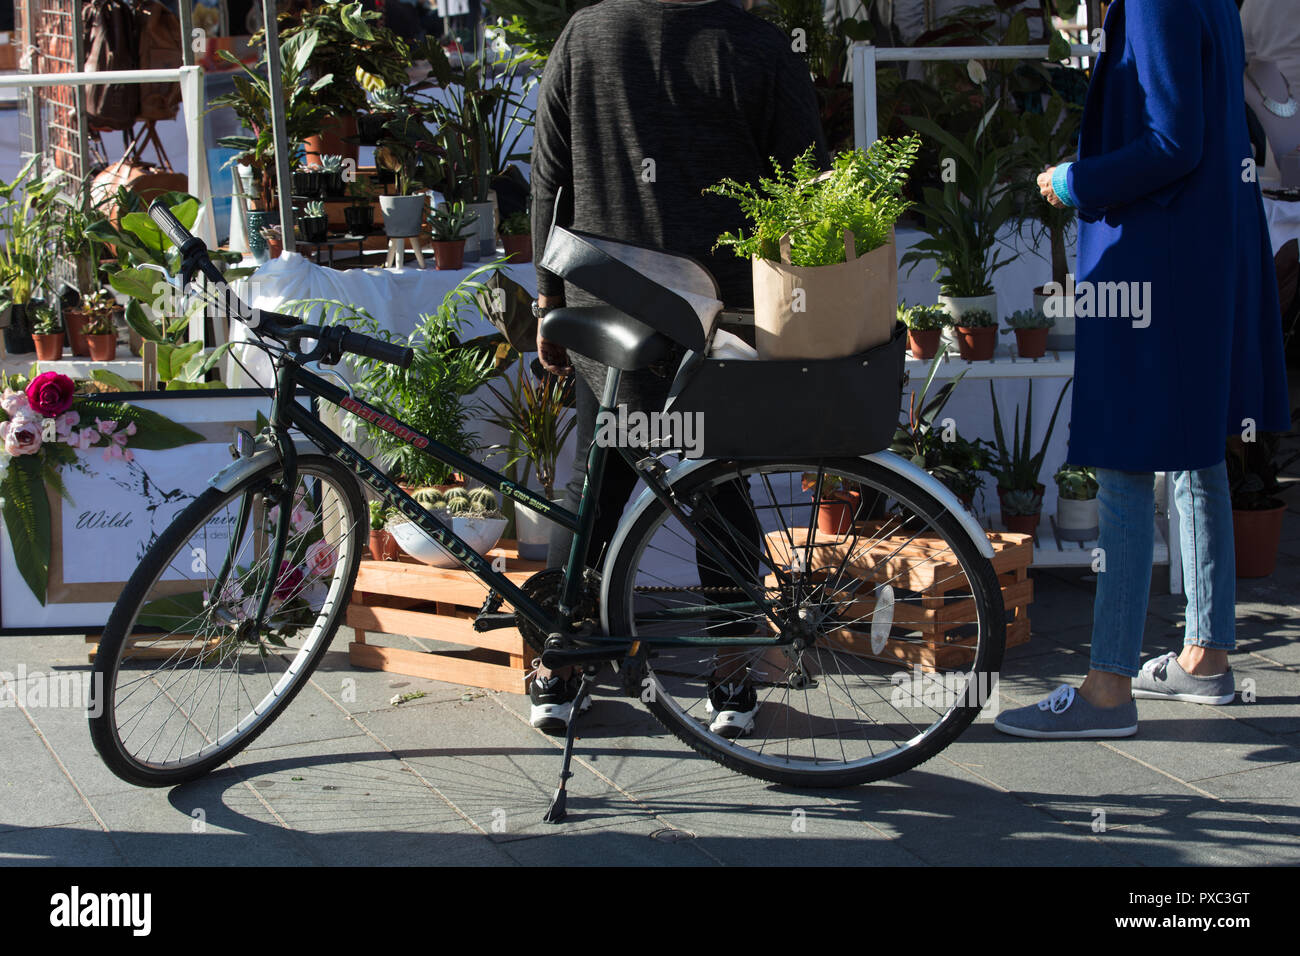 London, UK. 21st October 2018. Bicylce with a basket seen on Woolwich Market.  Credit: Joe Kuis / Alamy Live News Stock Photo